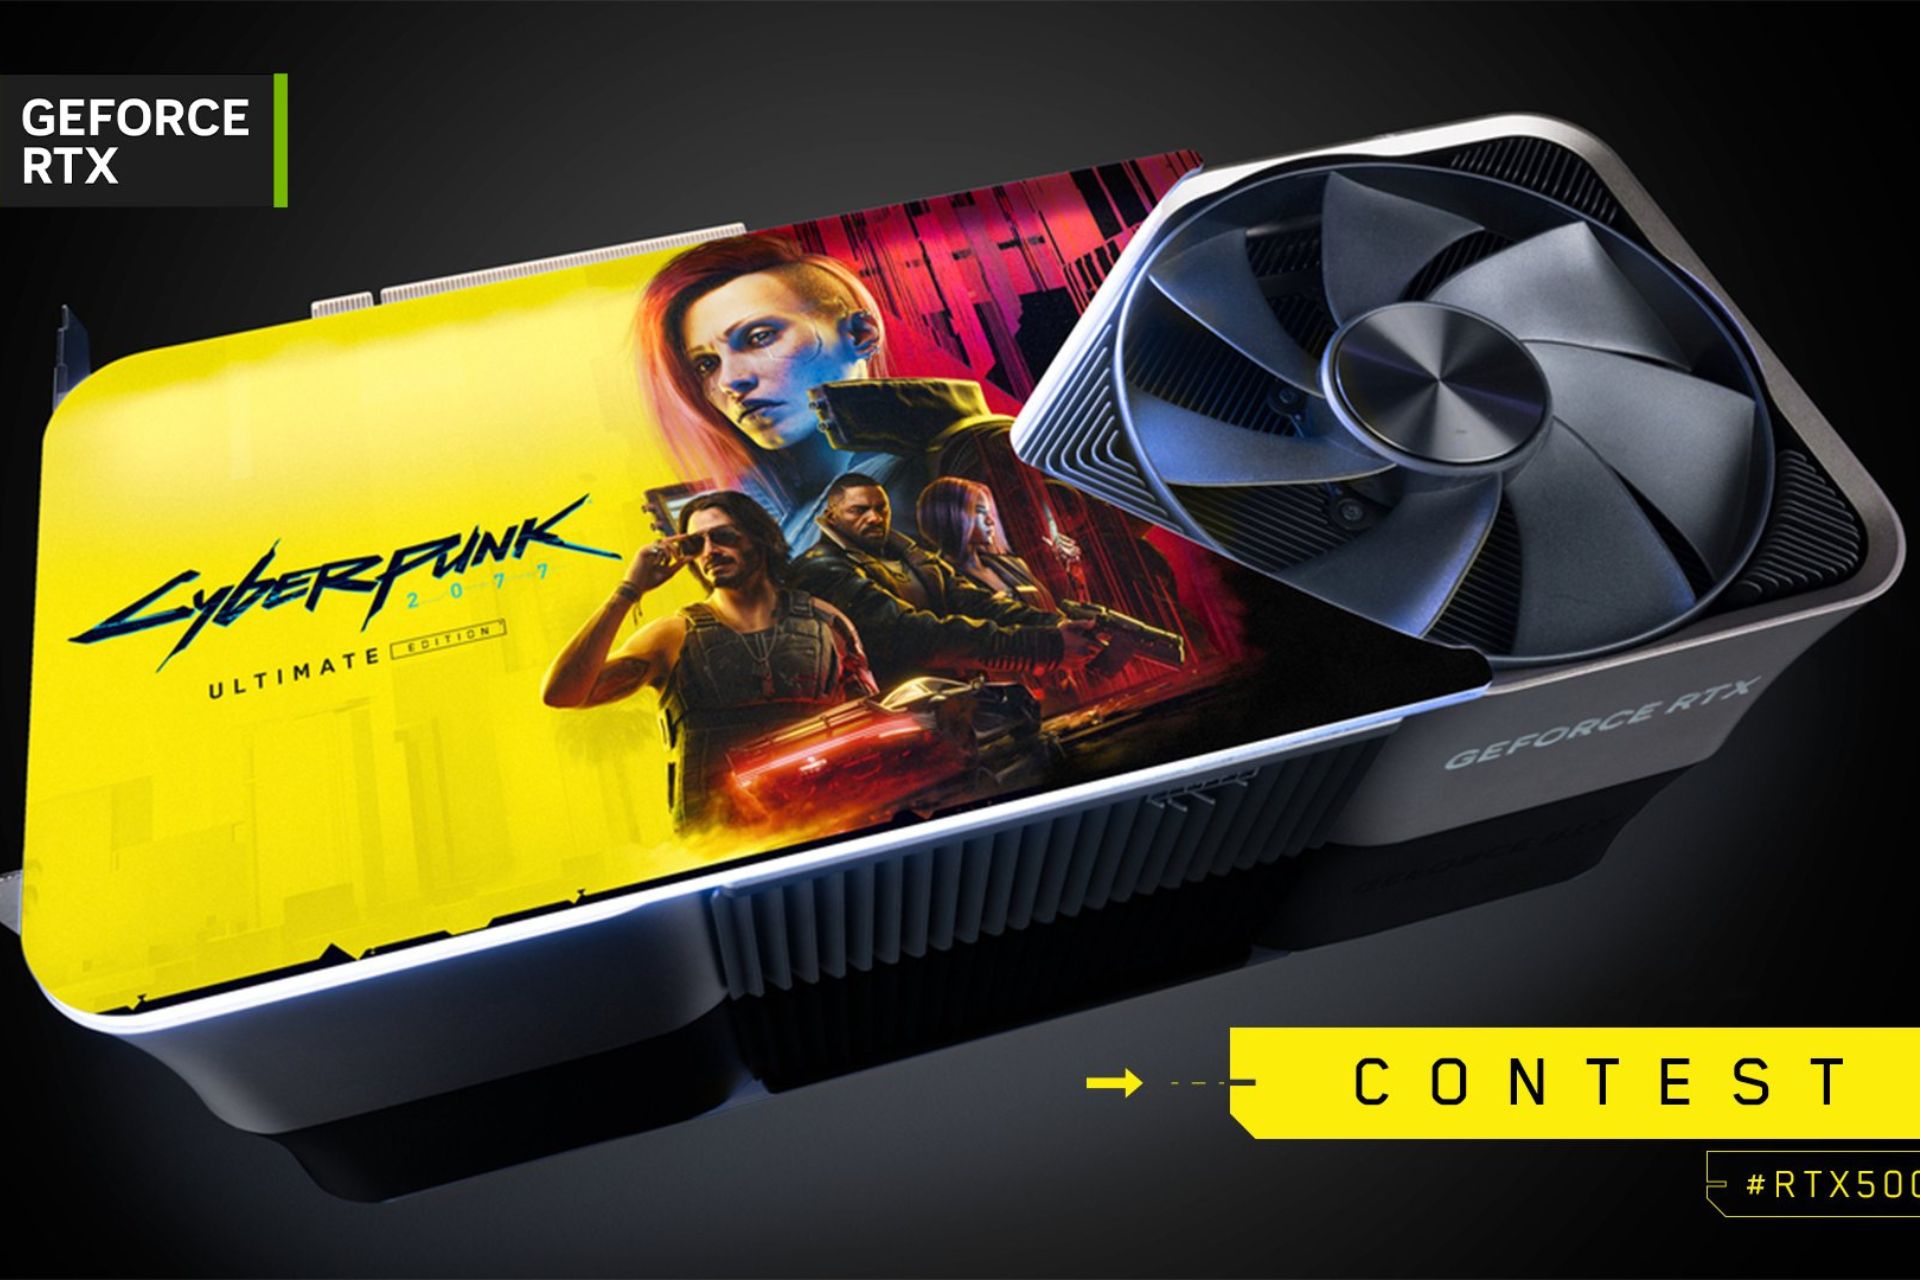 This one-time Cyberpunk 2077-themed GeForce RTX 4090 can be won in a contest, but it’s a real shame we can’t purchase it